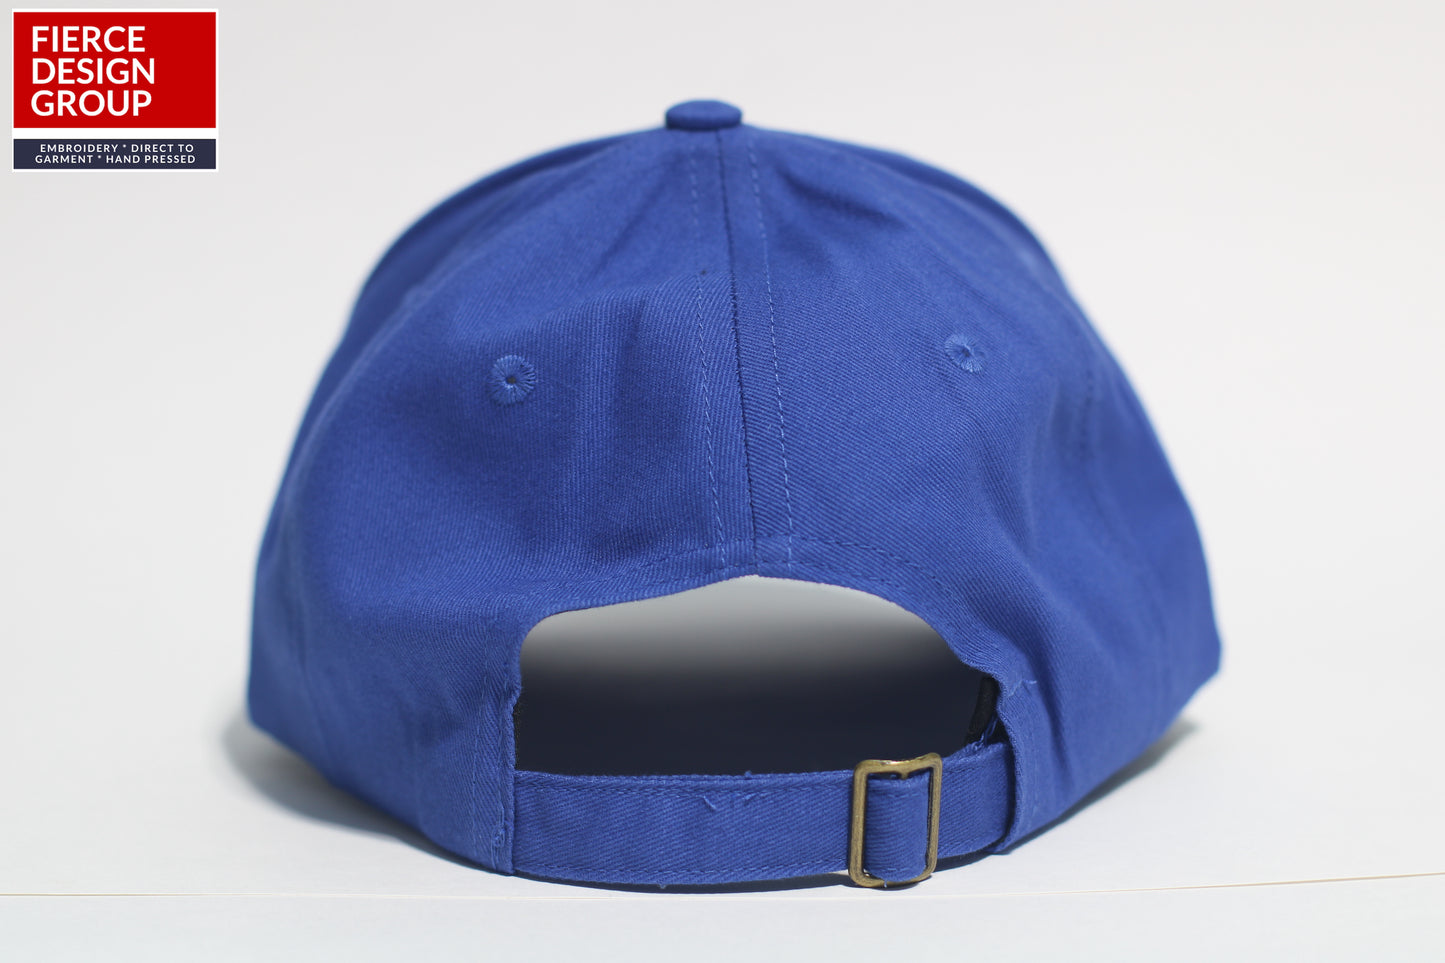 🧢Royal Blue 6-Panel Unstructured Cap - Embroidered